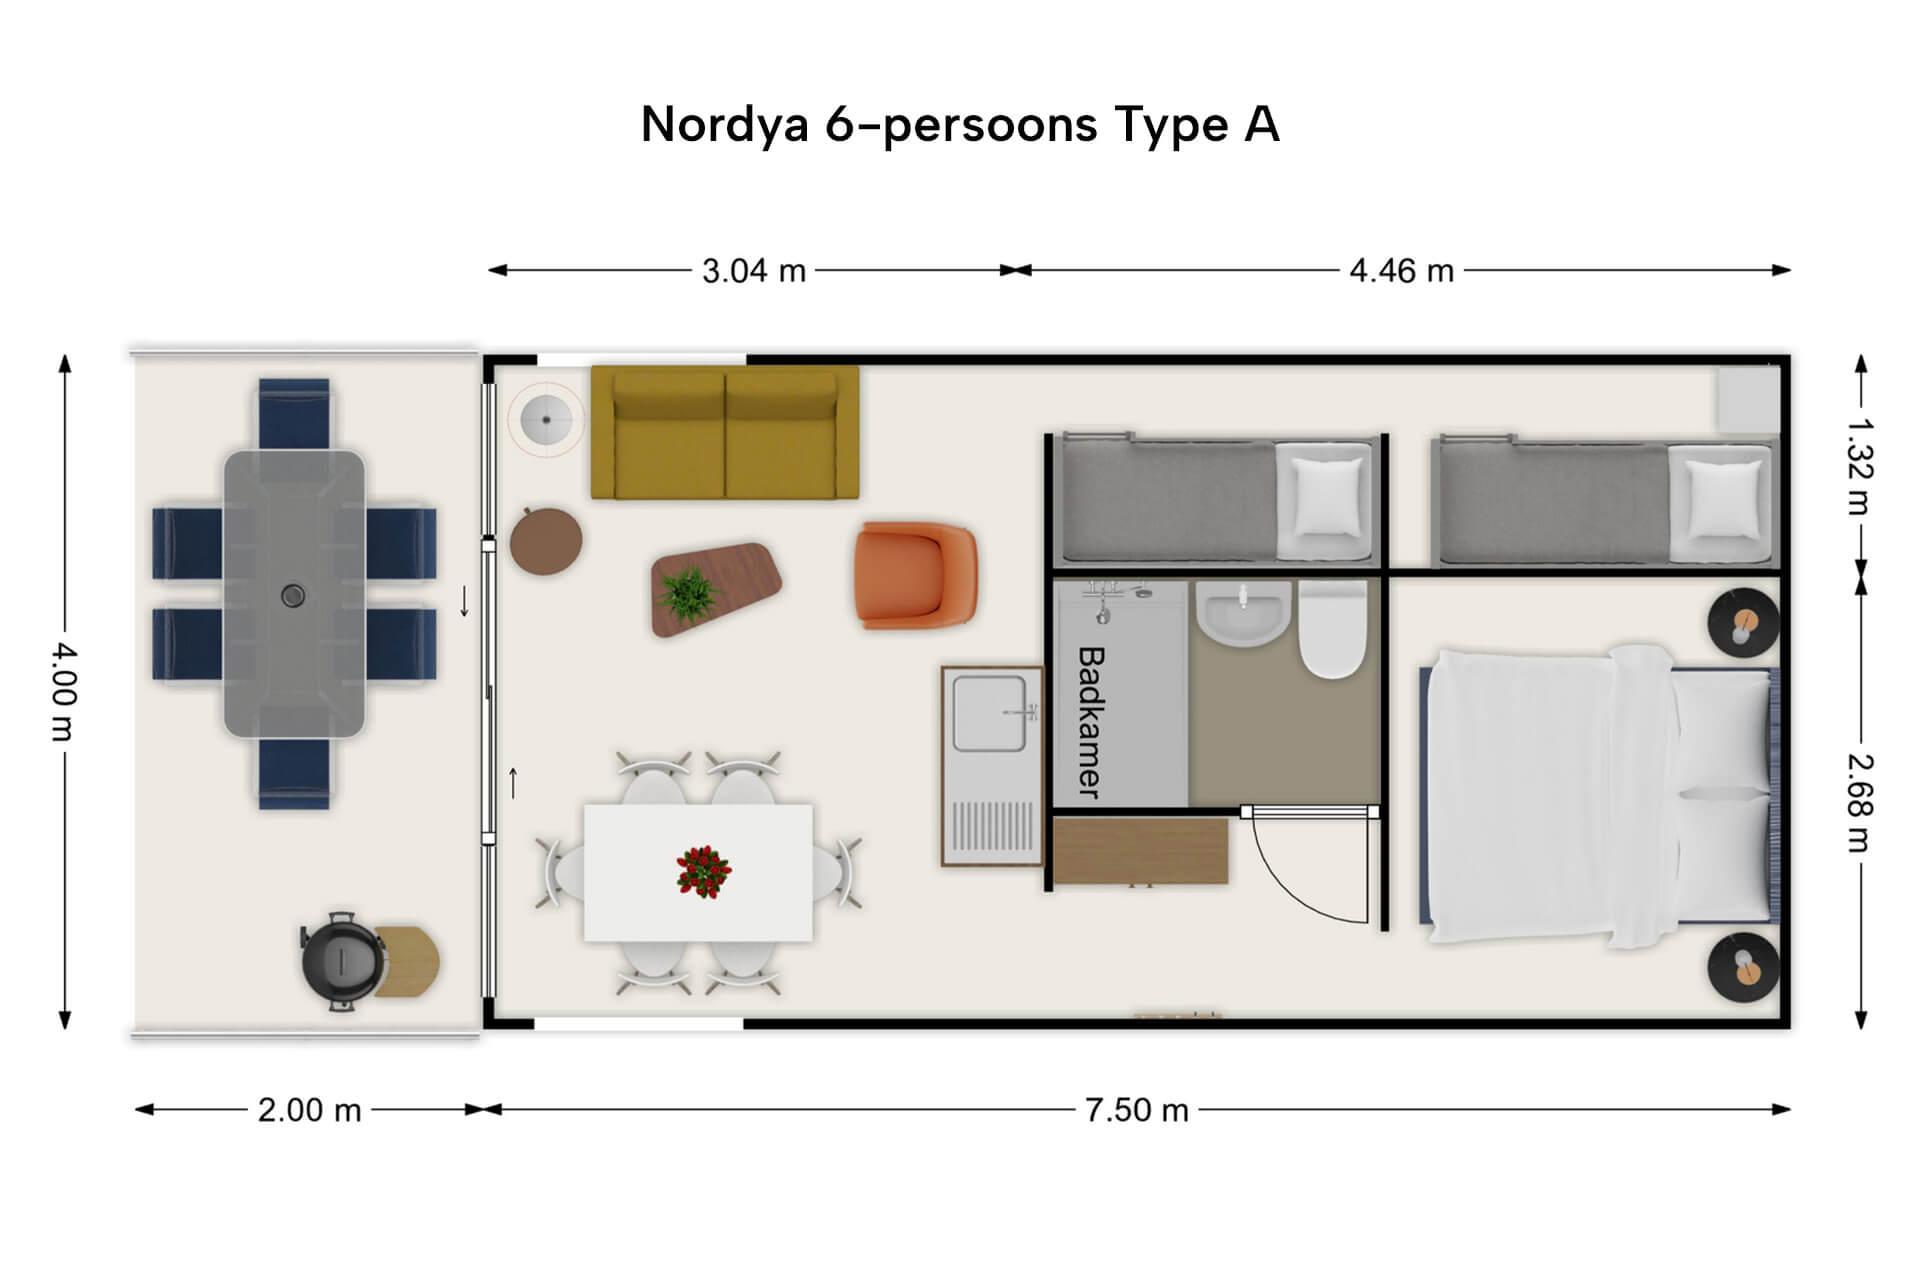 Nordya 6-persoons Type-A